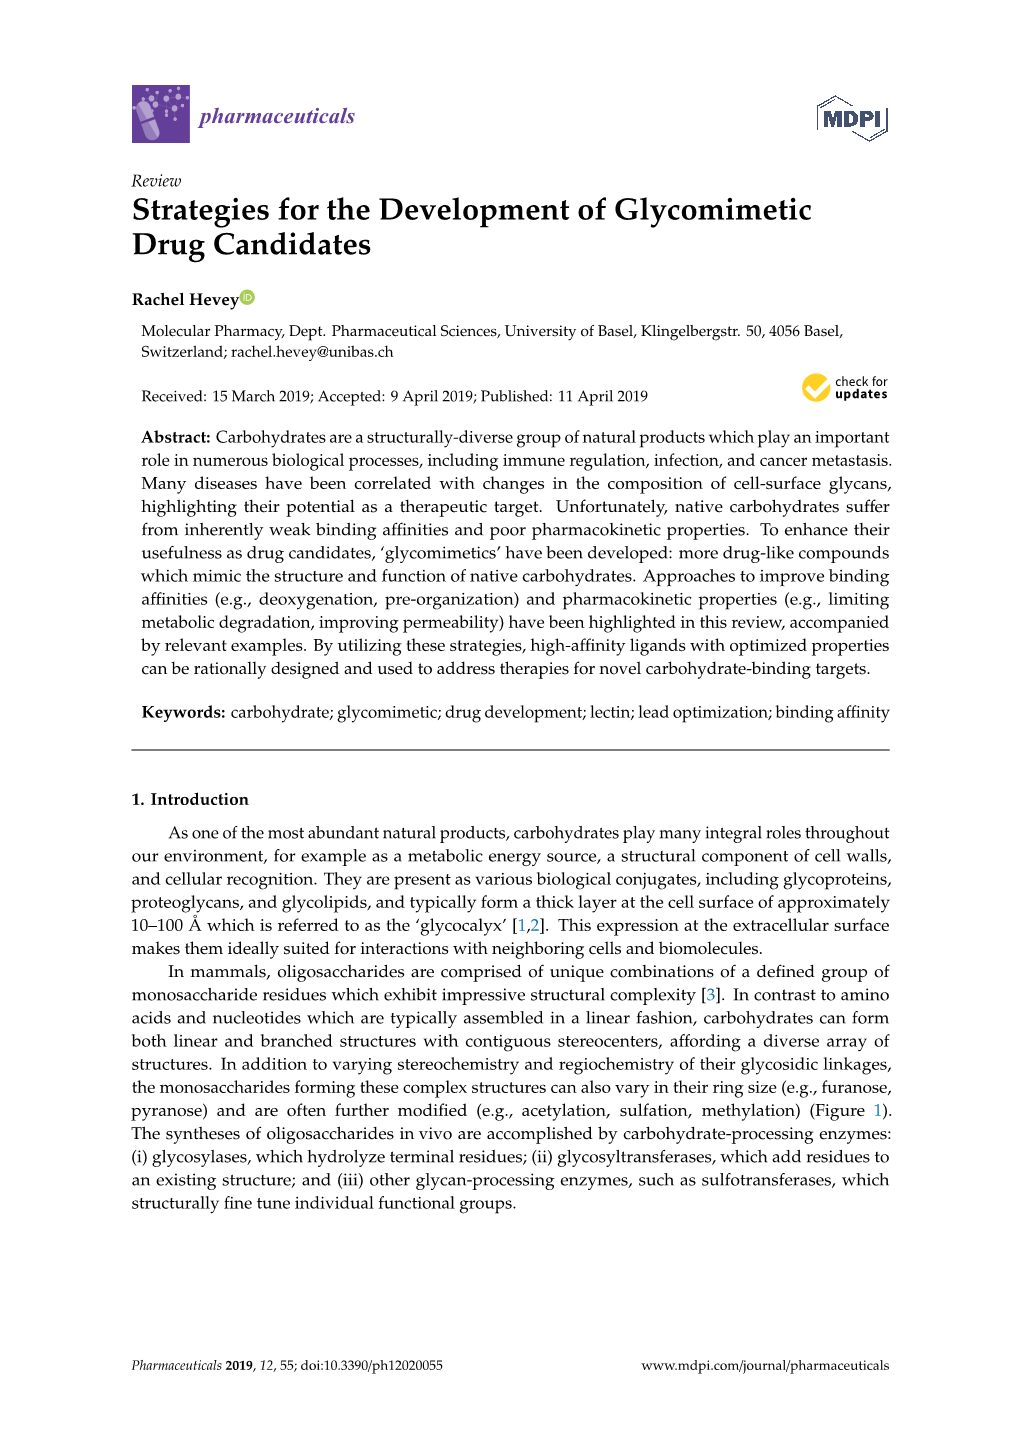 Strategies for the Development of Glycomimetic Drug Candidates